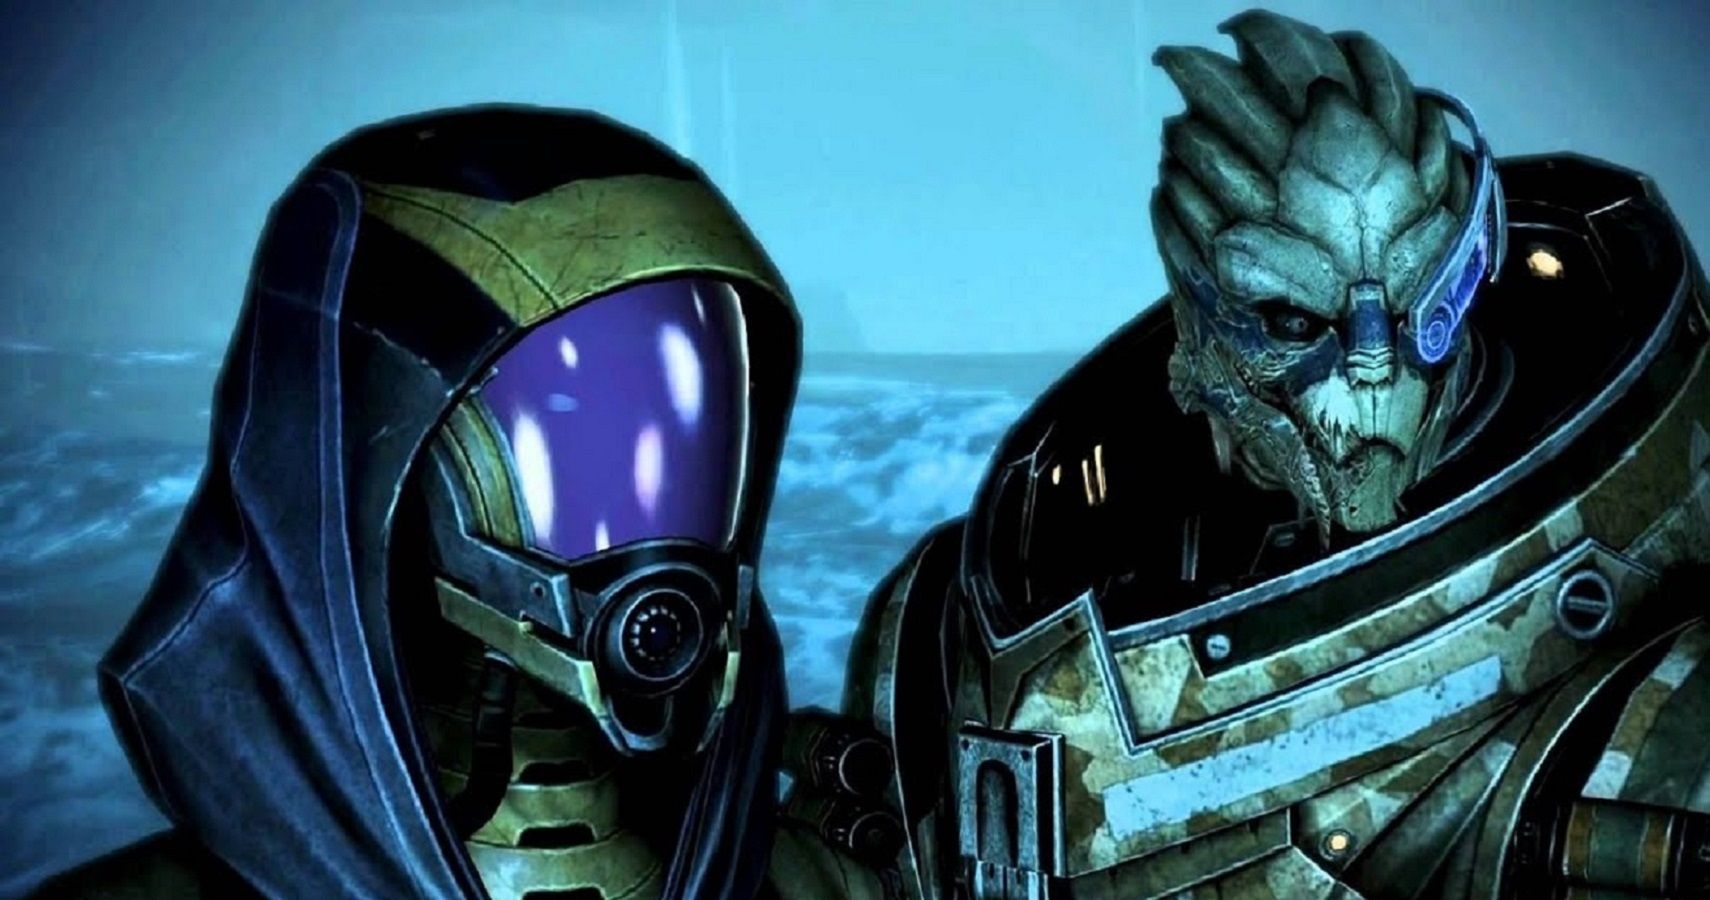 Garrus and Torri together on a planet.